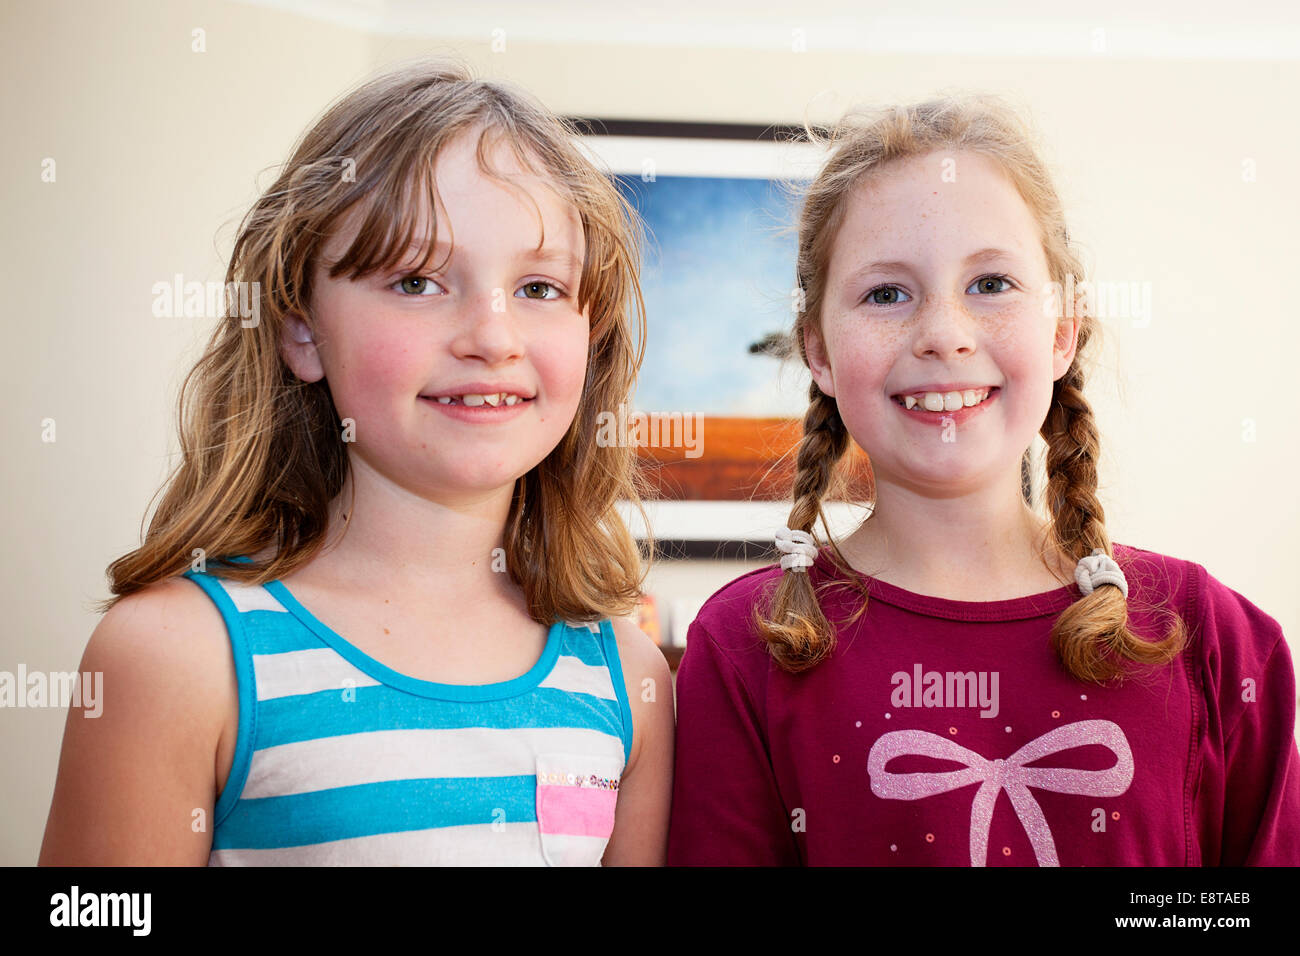 Two girls pose for portrait picture. Stock Photo